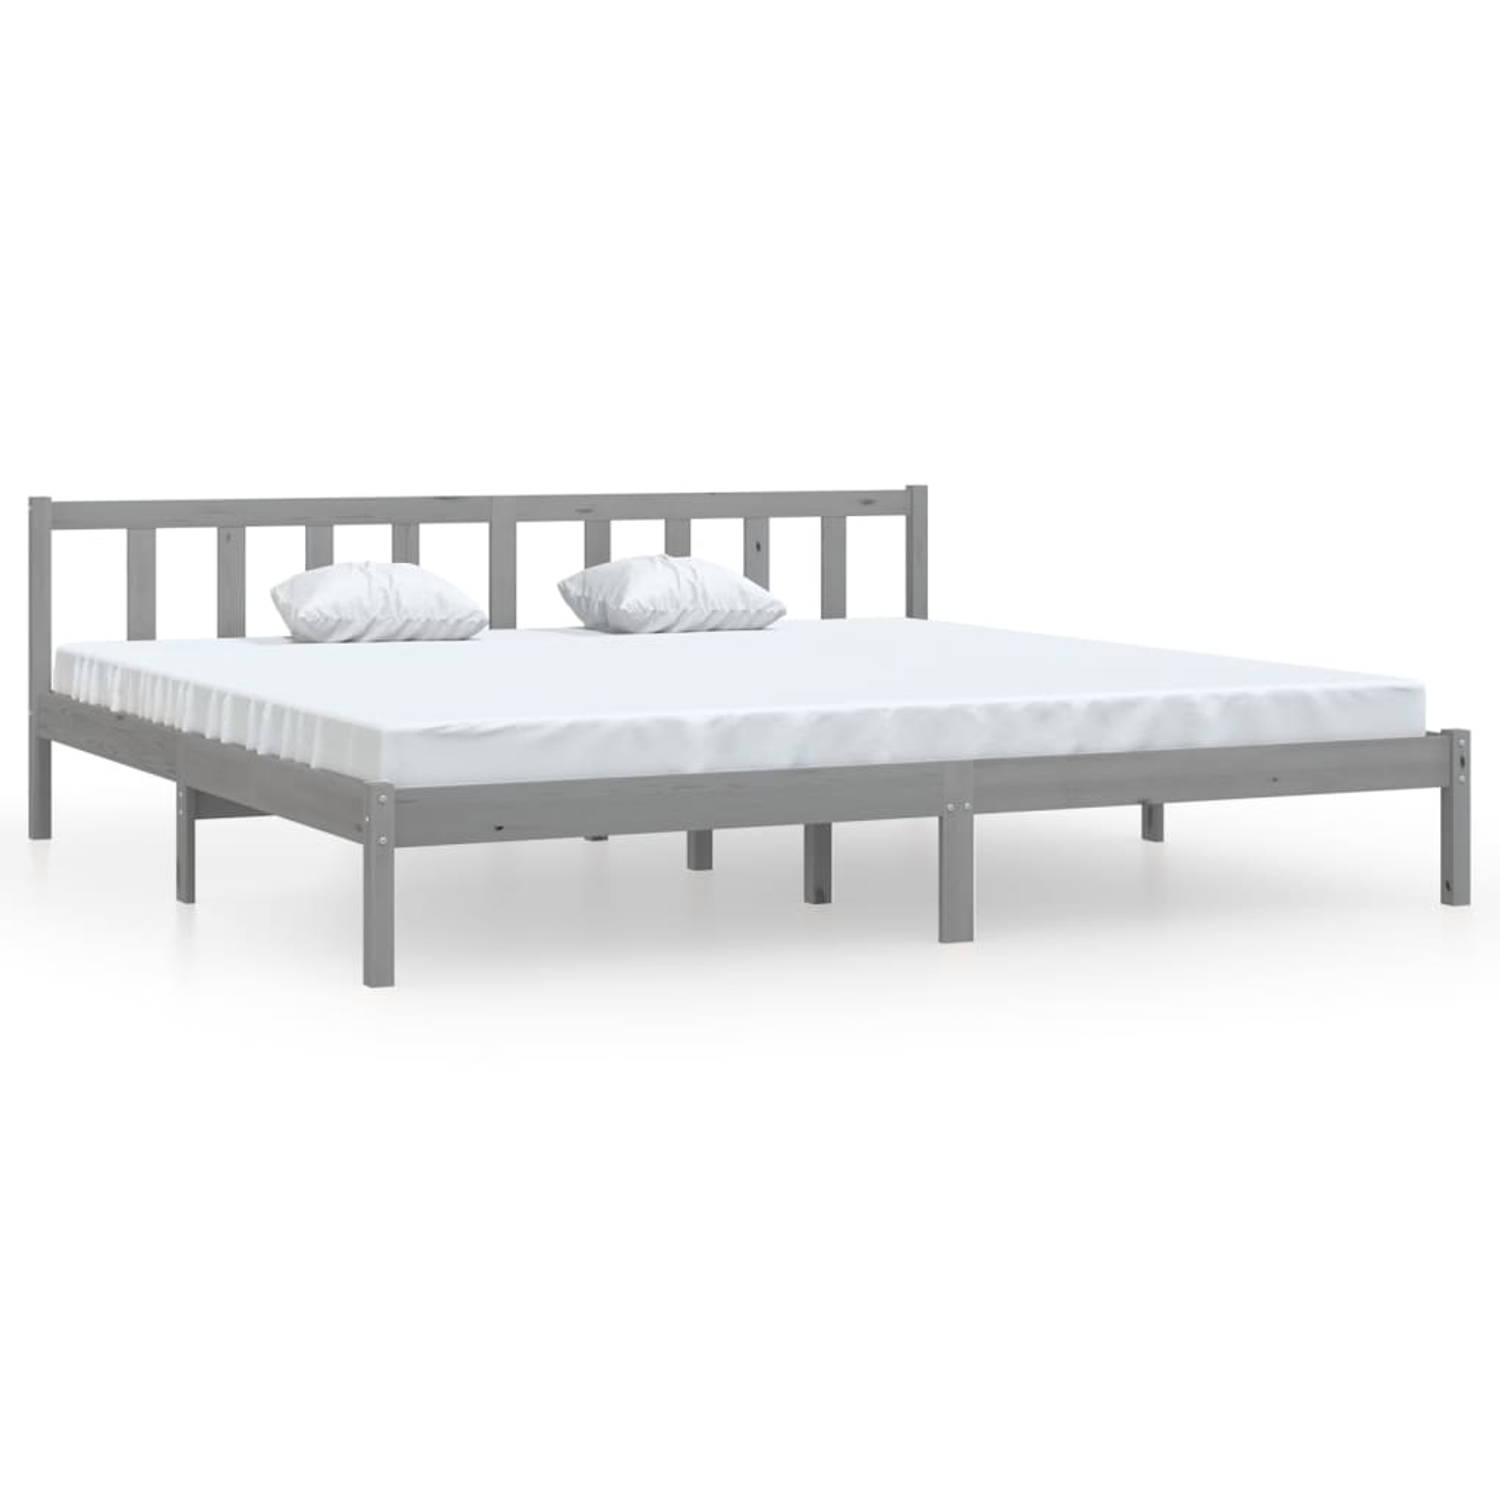 The Living Store Bedframe massief grenenhout grijs 200x200 cm - Bedframe - Bedframe - Bed Frame - Bed Frames - Bed - Bedden - 1-persoonsbed - 1-persoonsbedden - Eenpersoons Bed